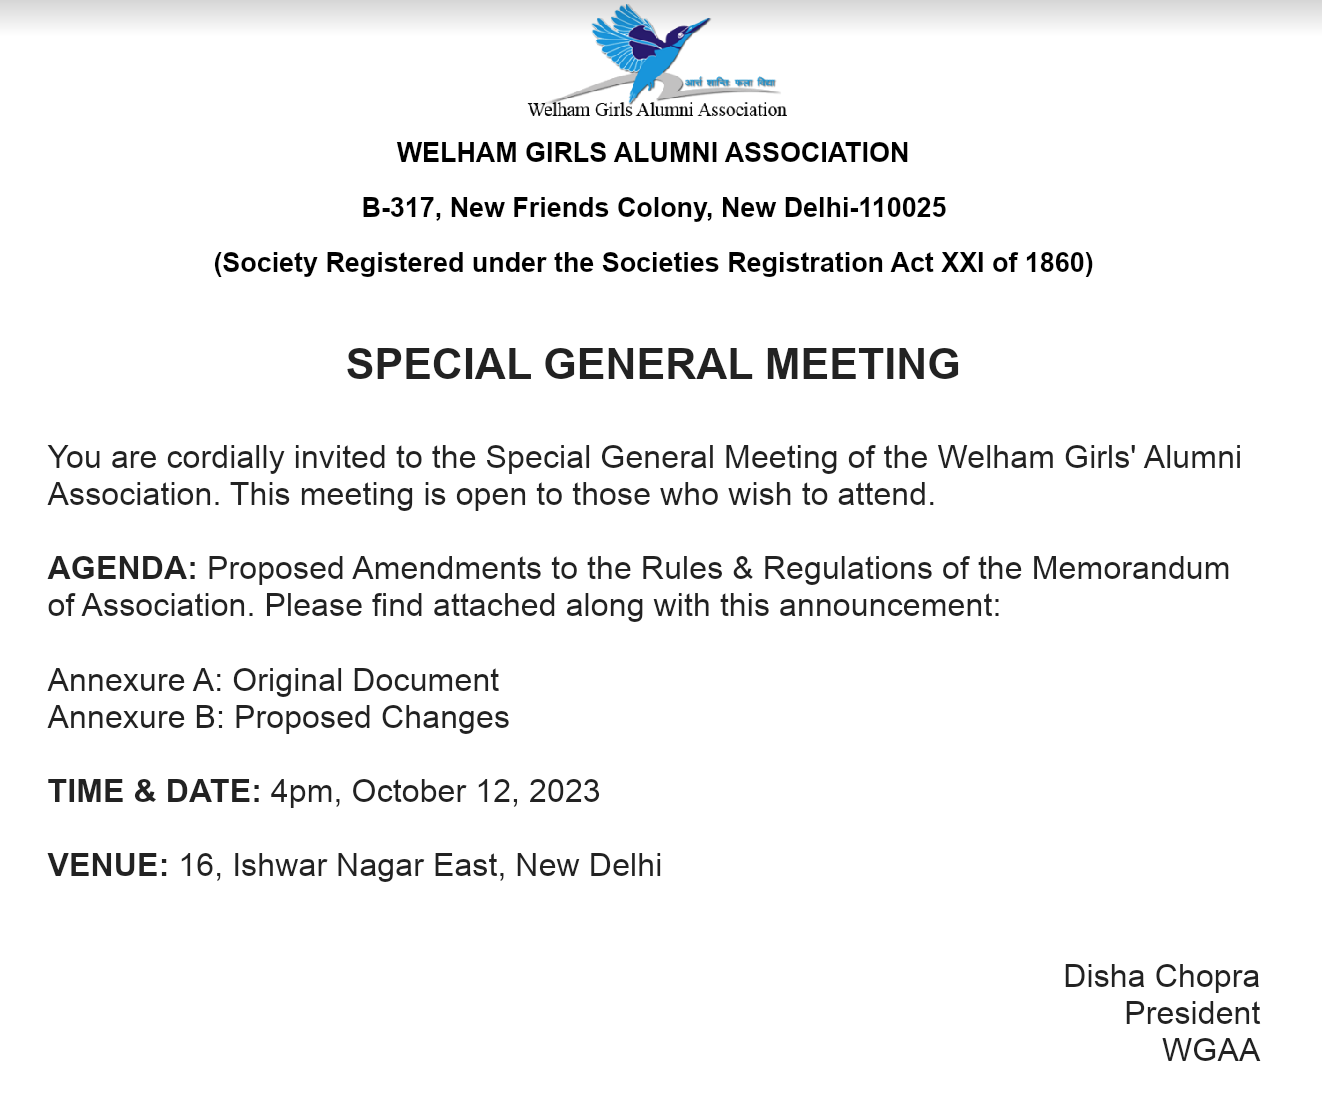 SPECIAL GENERAL MEETING - 12th October 2023